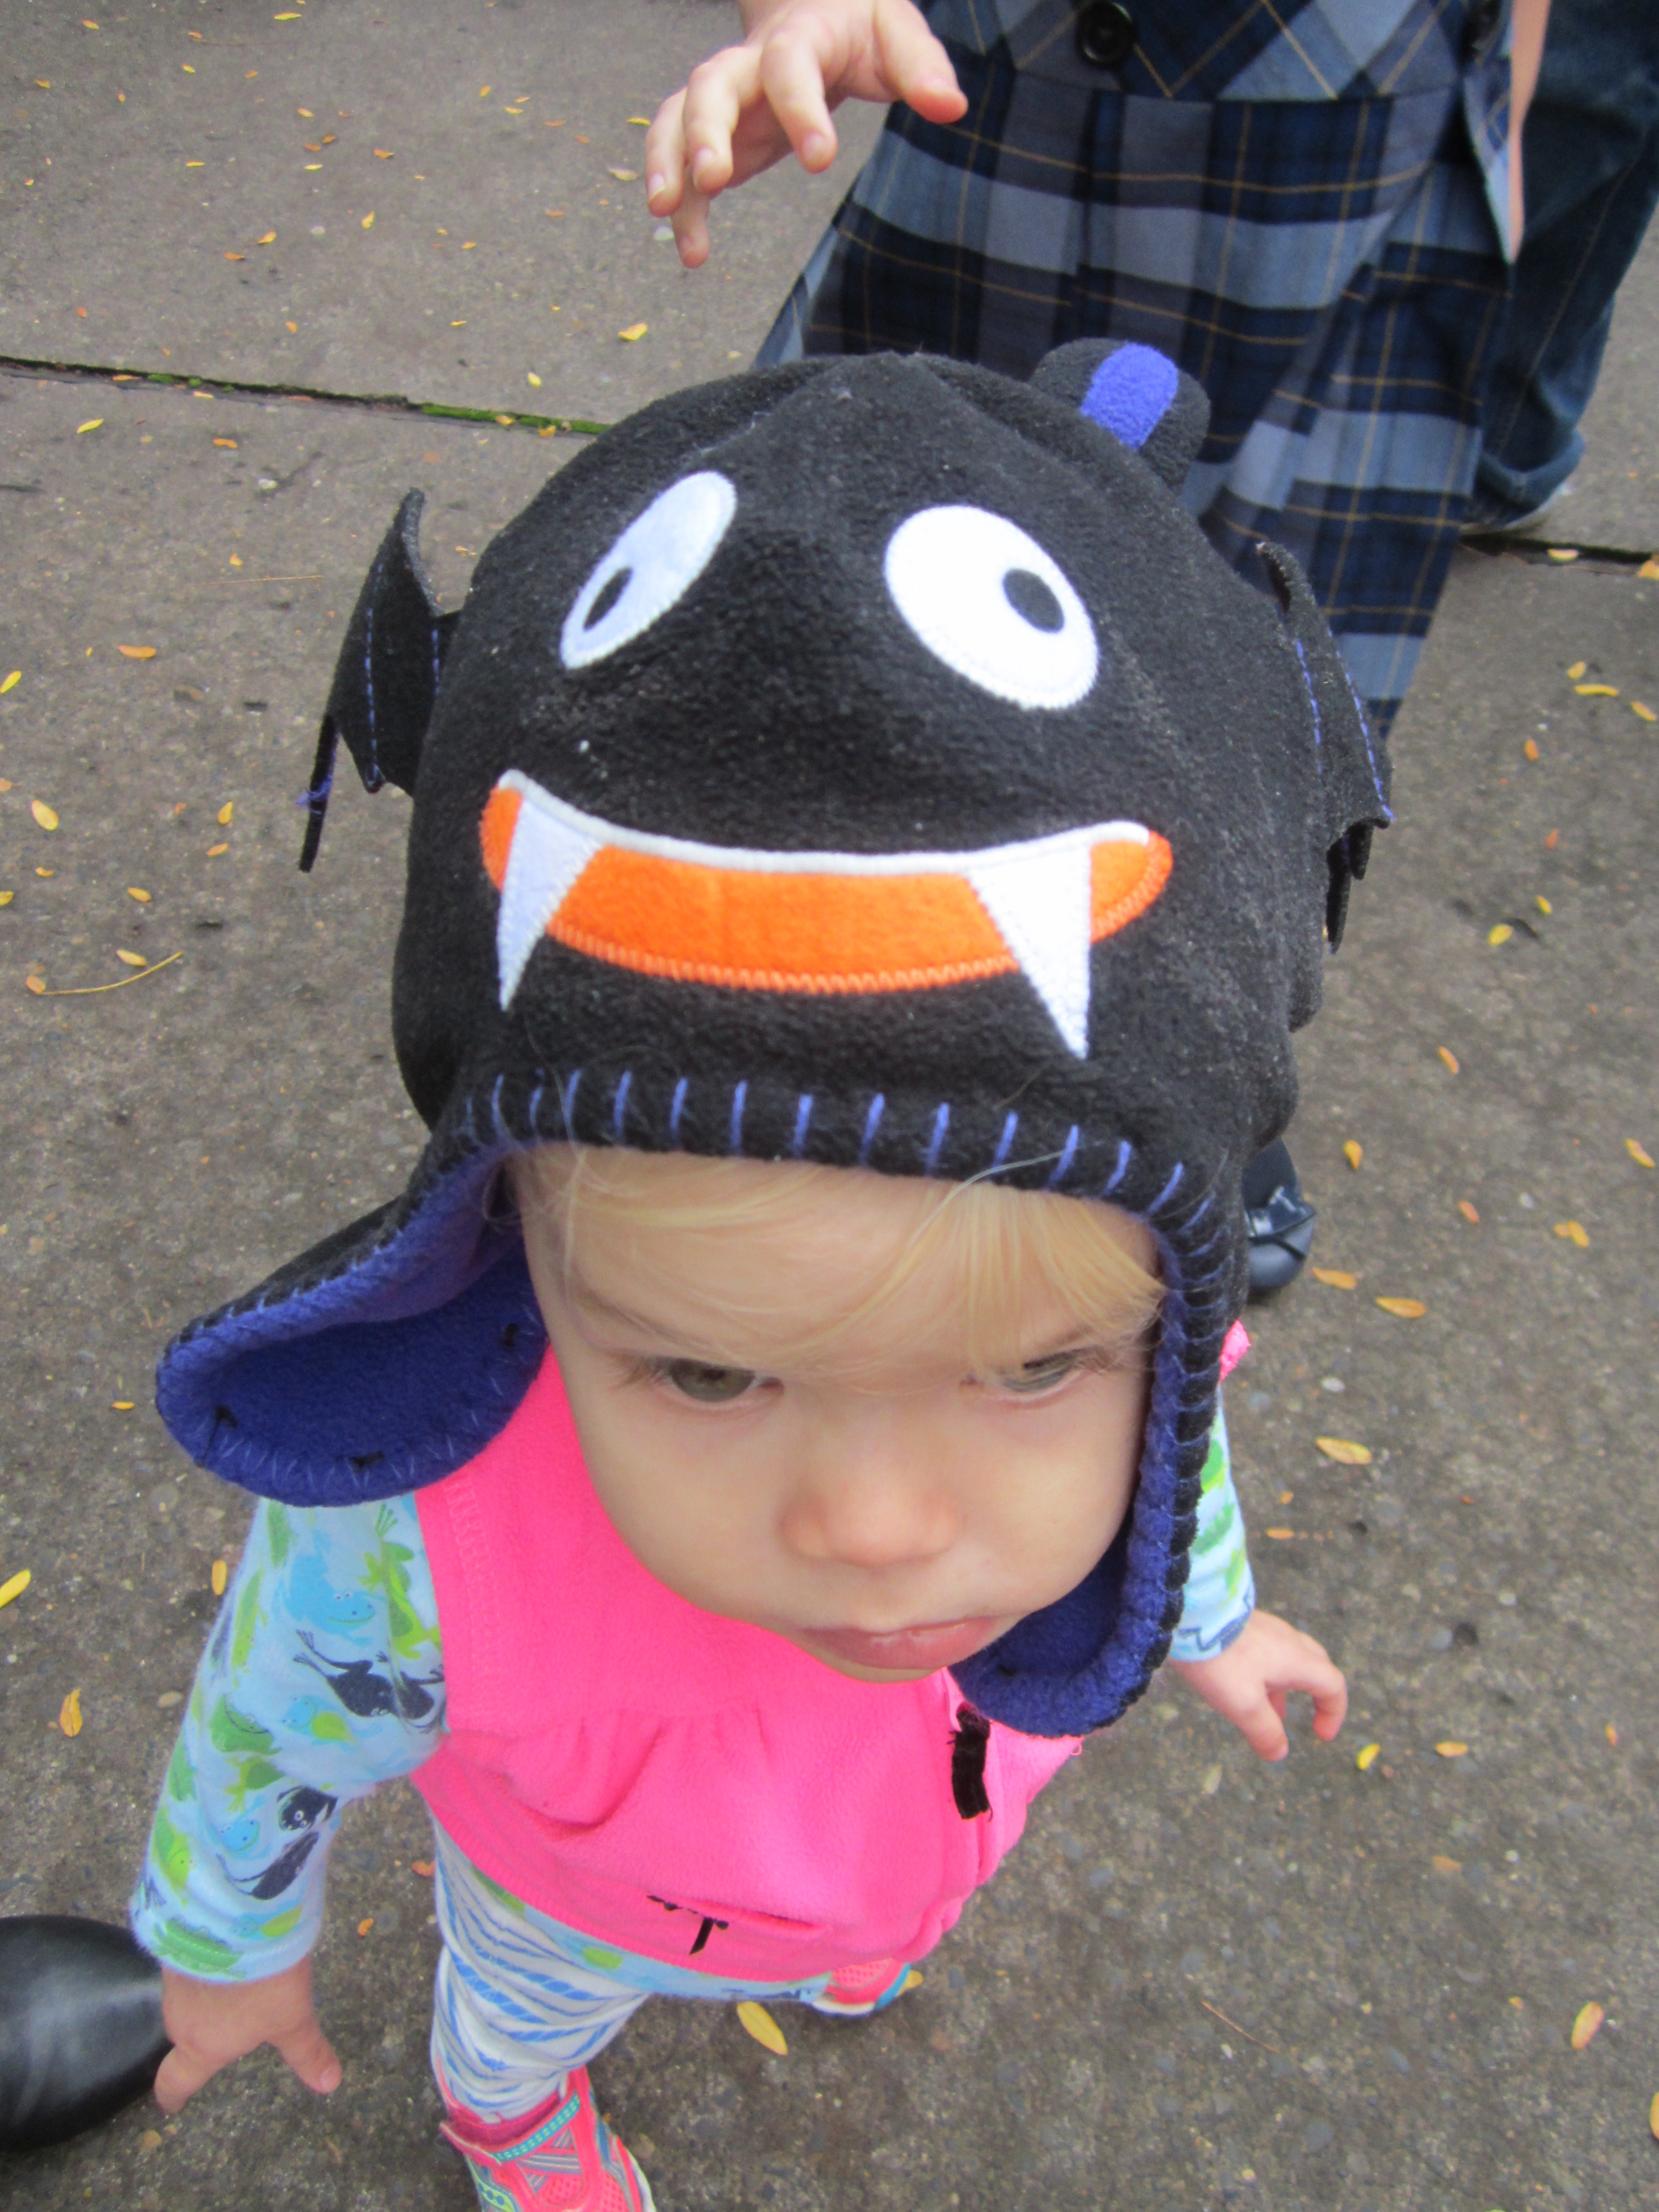 Some random kid at the zoo couldn't stop touching Peeper's bat hat. I don't blame her—it's irresistible!